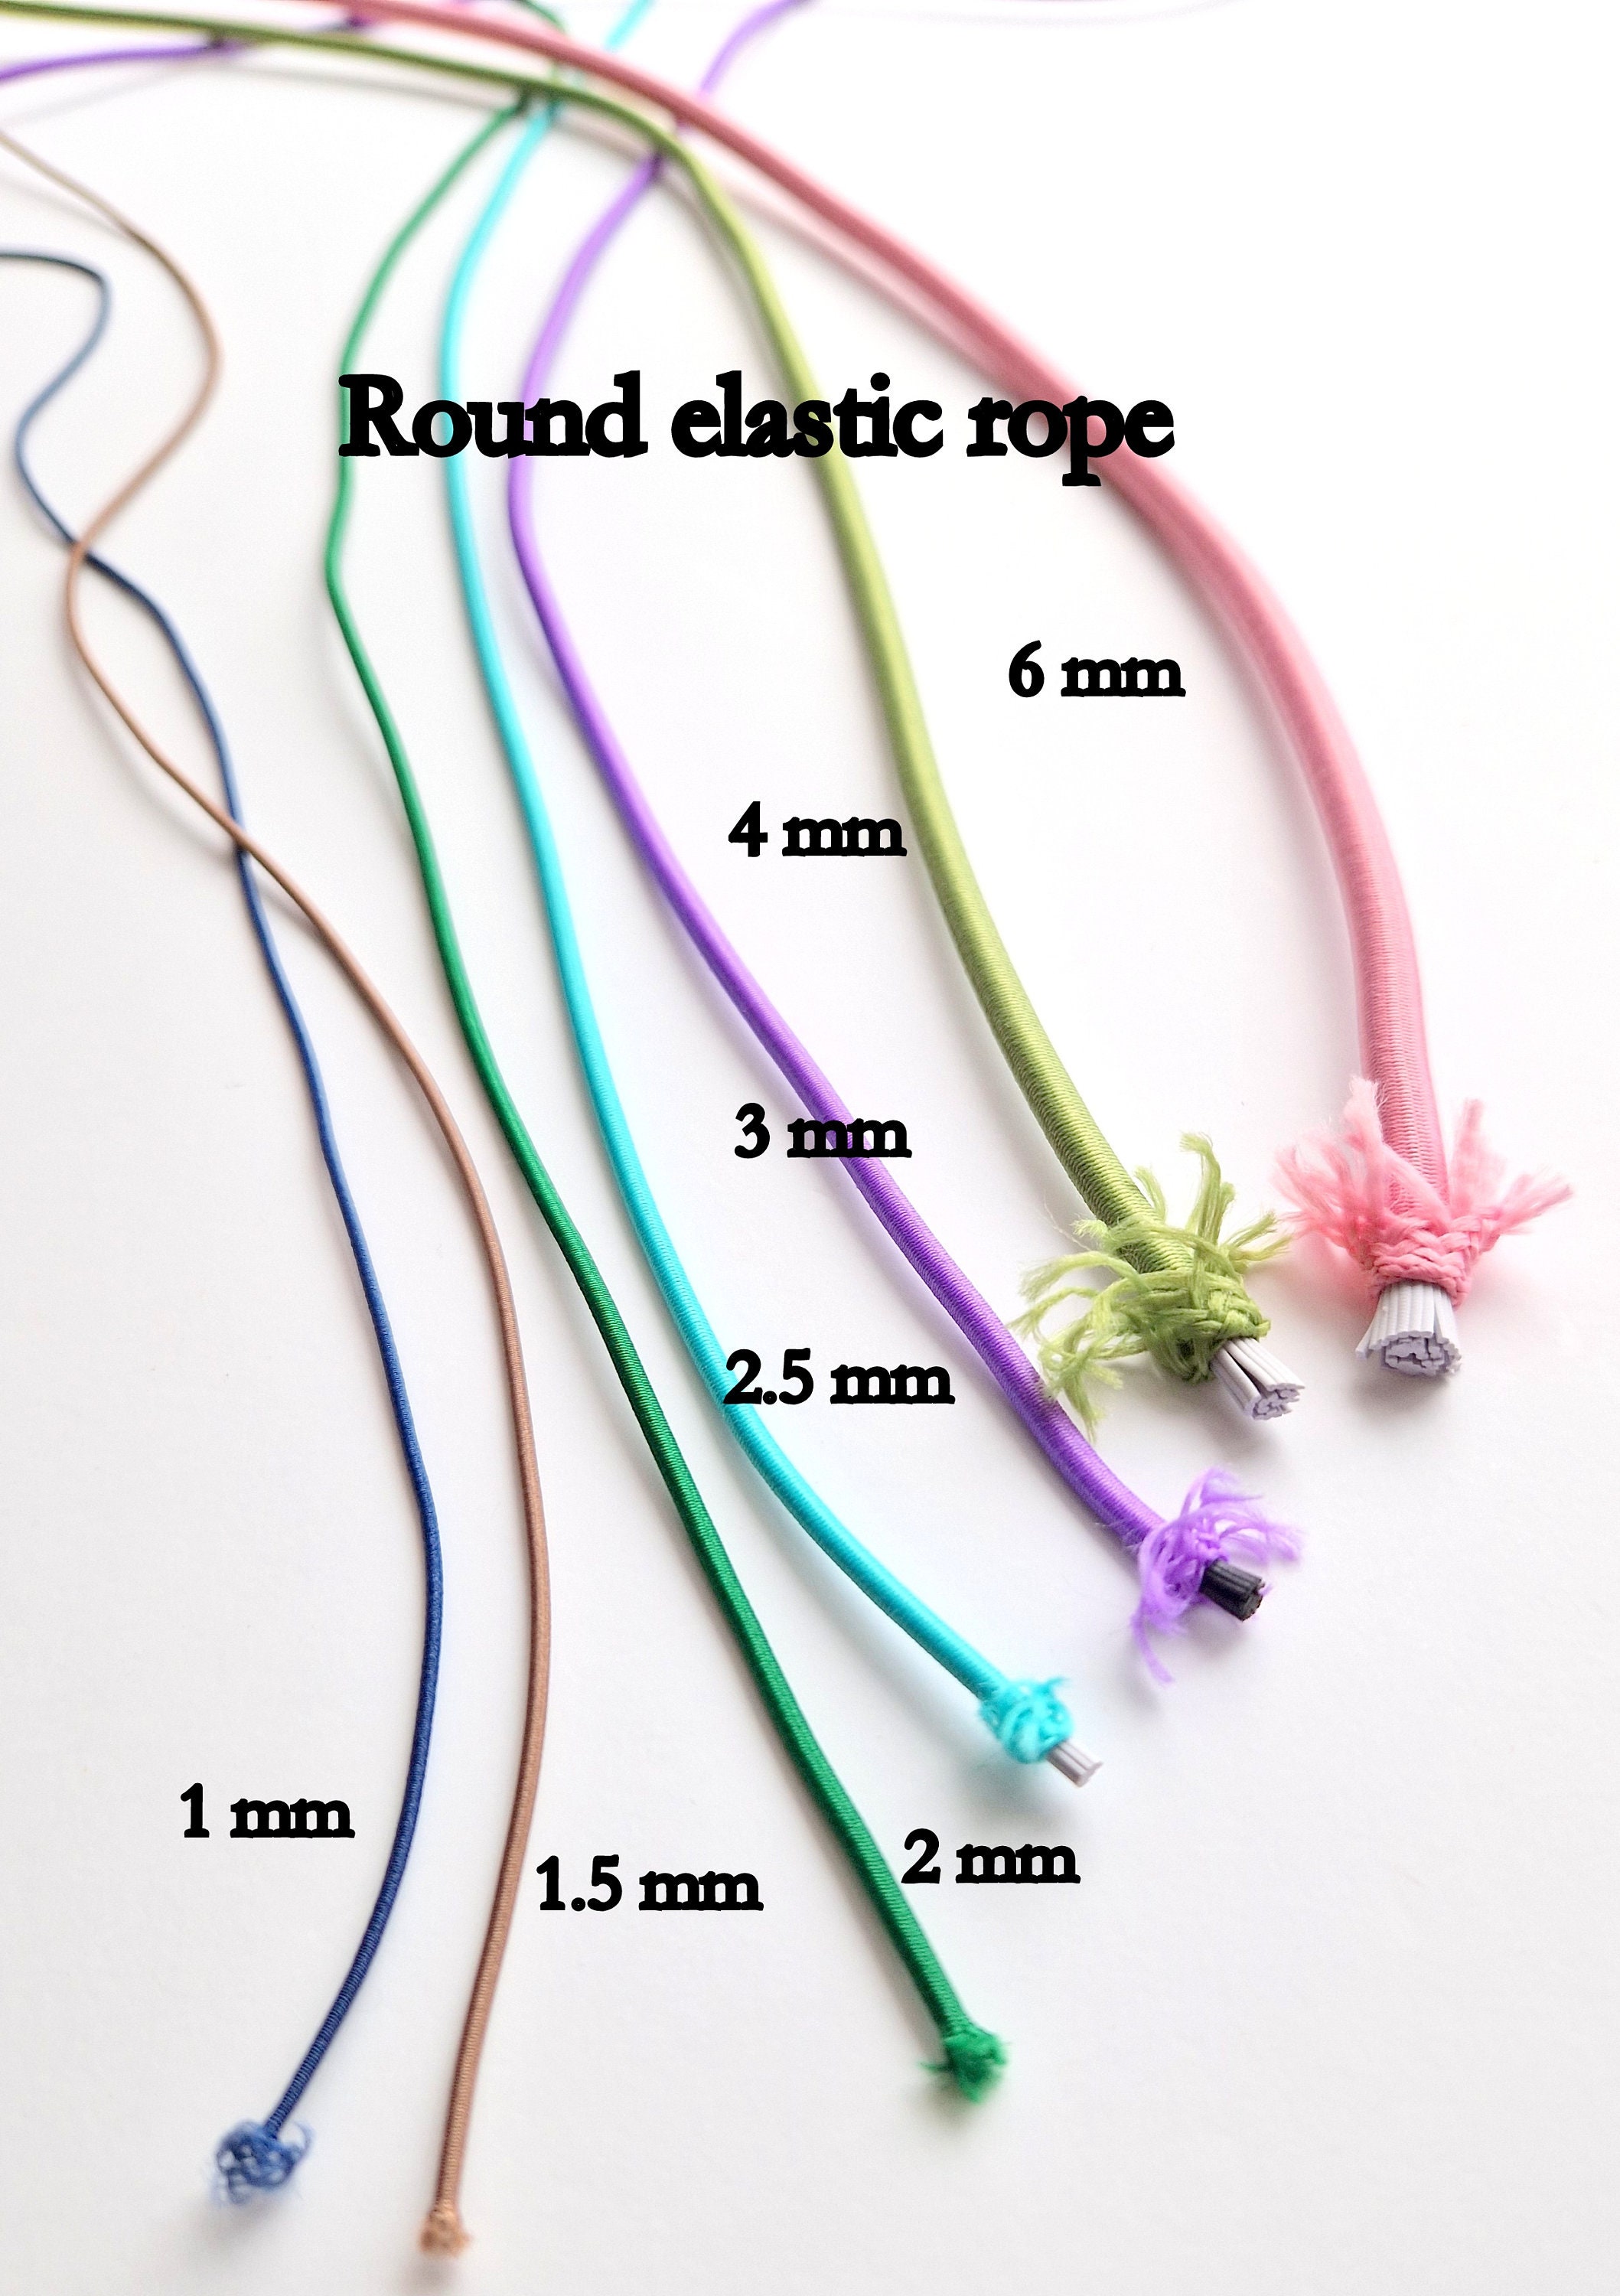 Elastic Cord Stretchy String 2mm 49 Yards Light Purple for Crafts